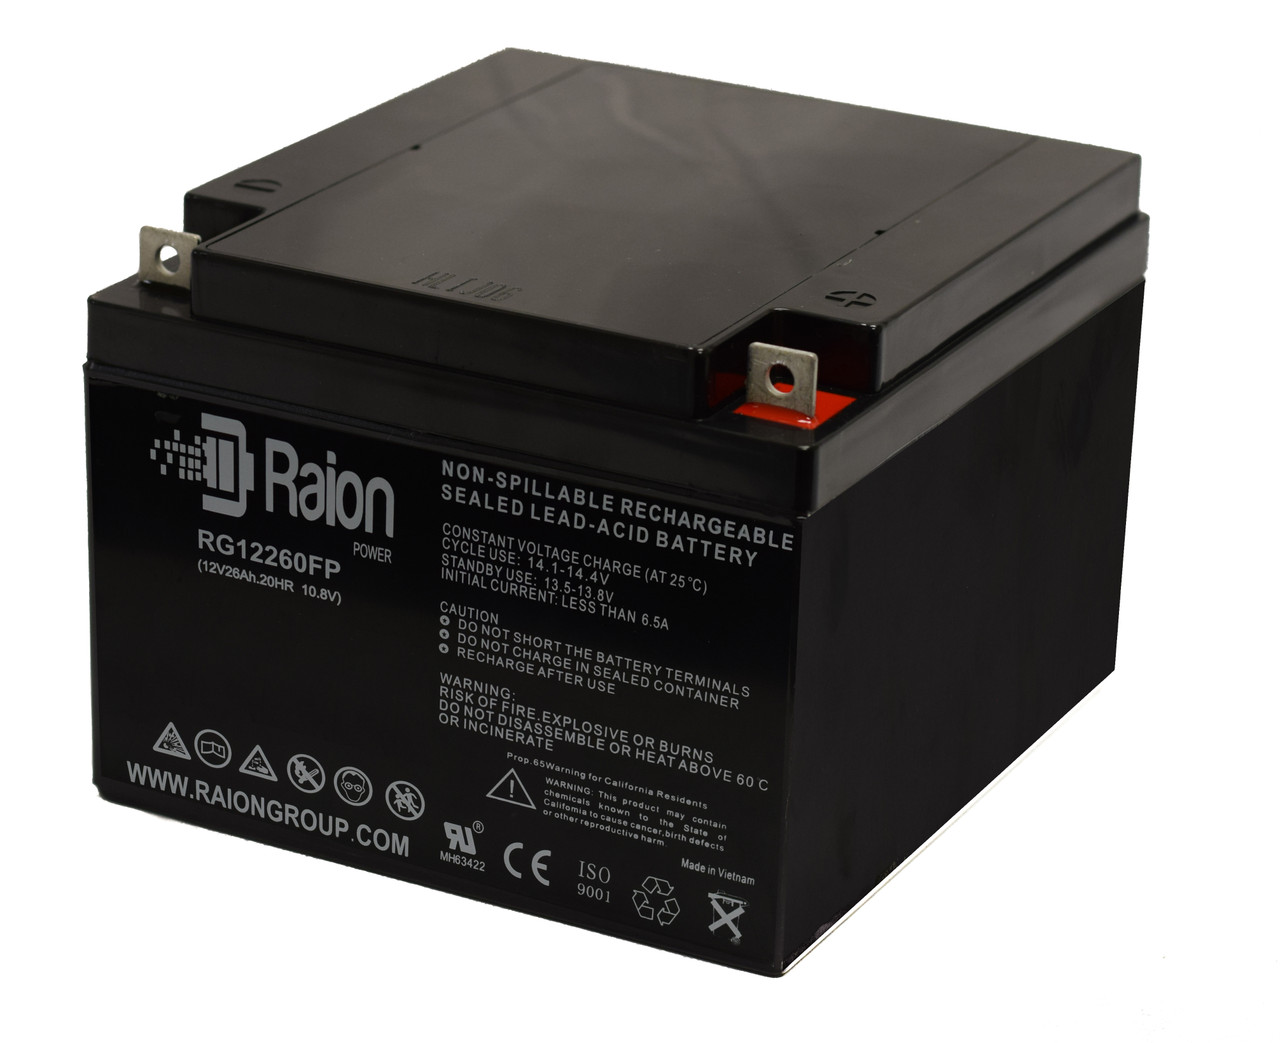 Raion Power Replacement 12V 26Ah Battery for Genesis NP24-12 - 1 Pack